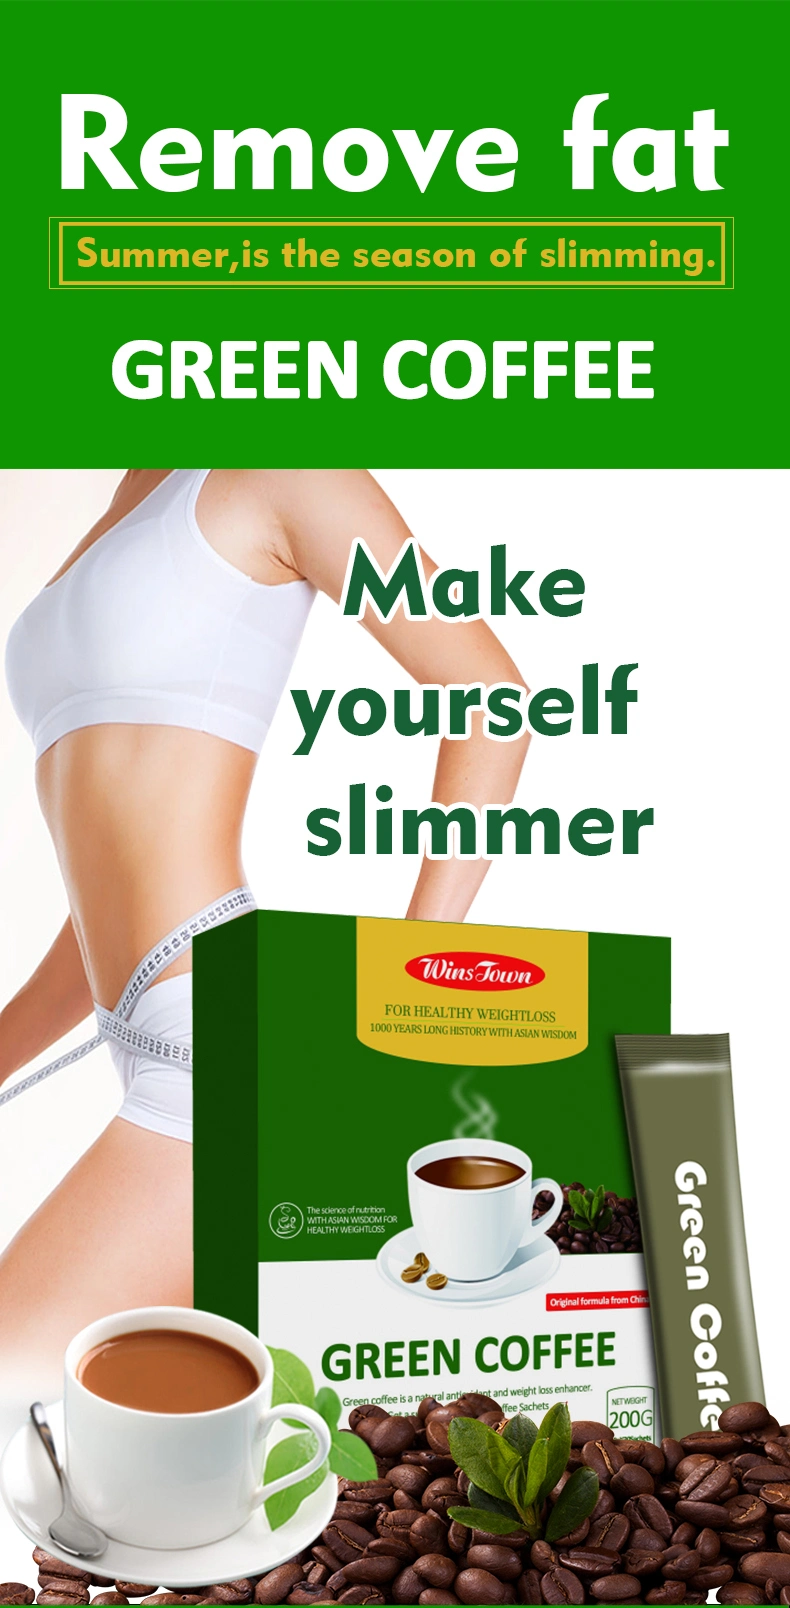 Chinese Formular Green coffee Healthy Weight Loss Slimming Capsules Pills